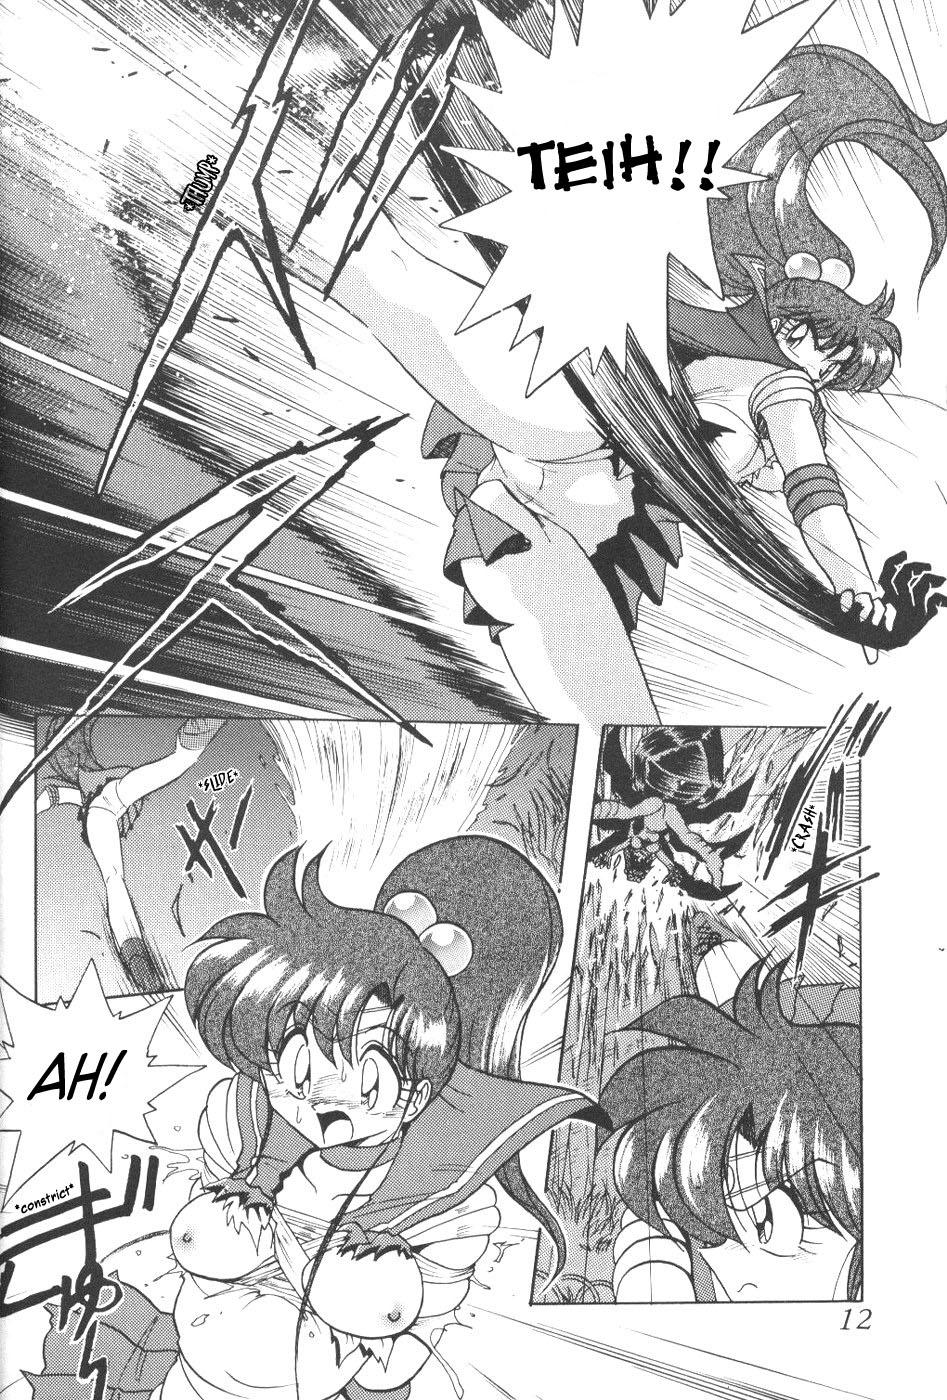 Sloppy Silent Saturn 5 - Sailor moon 4some - Page 9